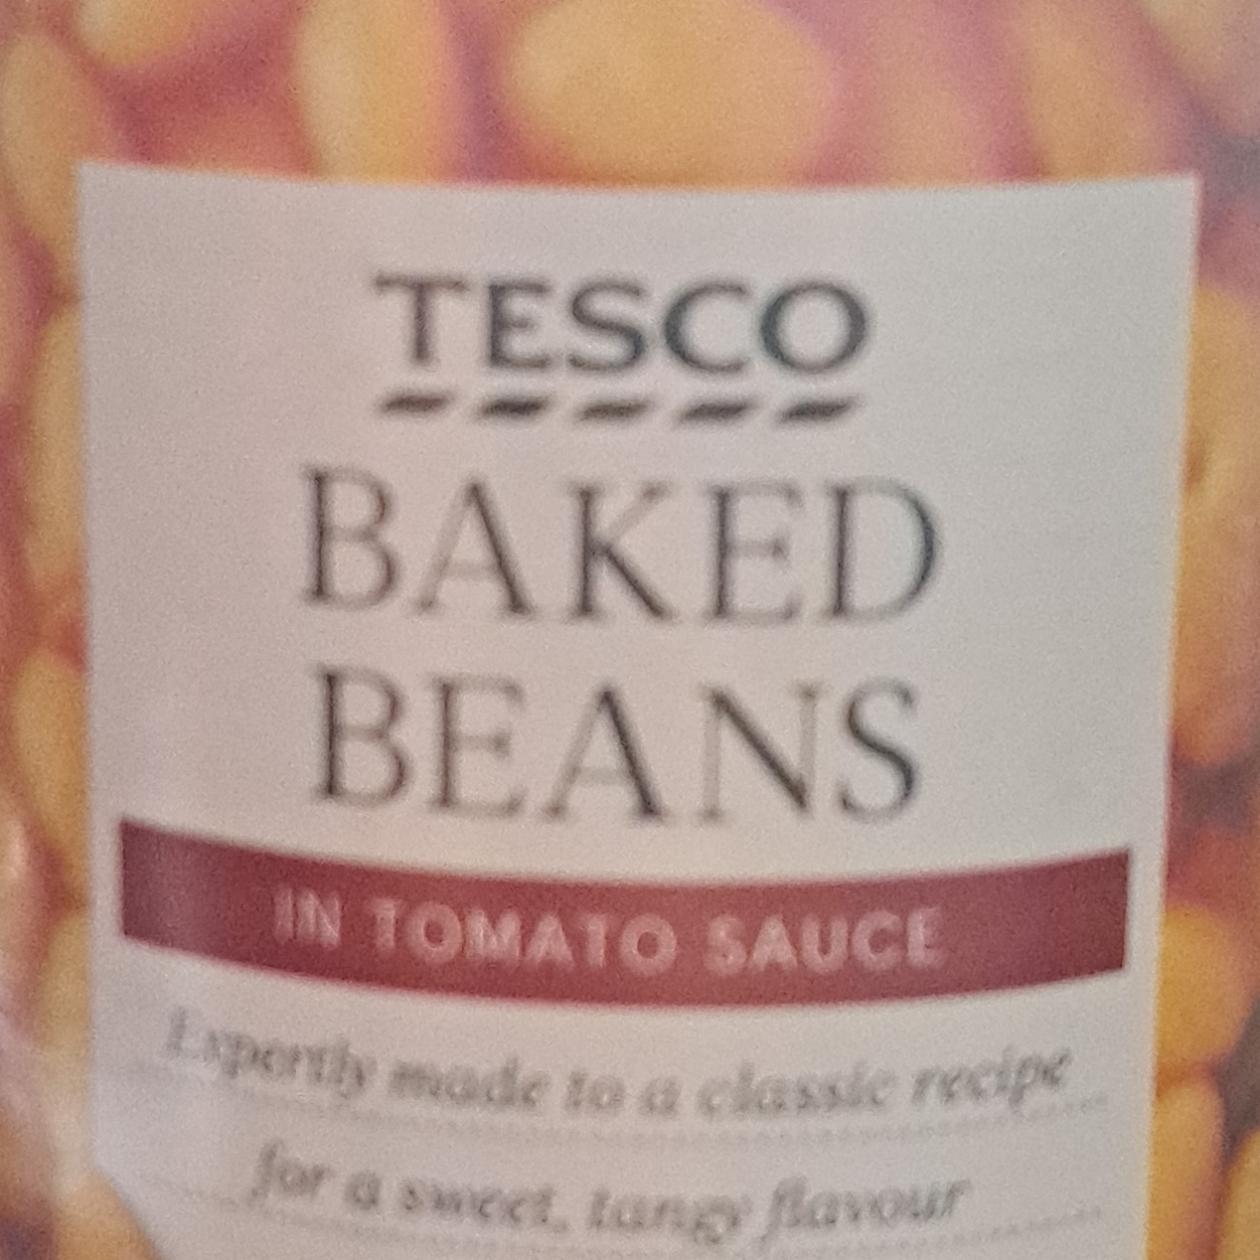 Фото - Baked beans in tomato sauce Tesco